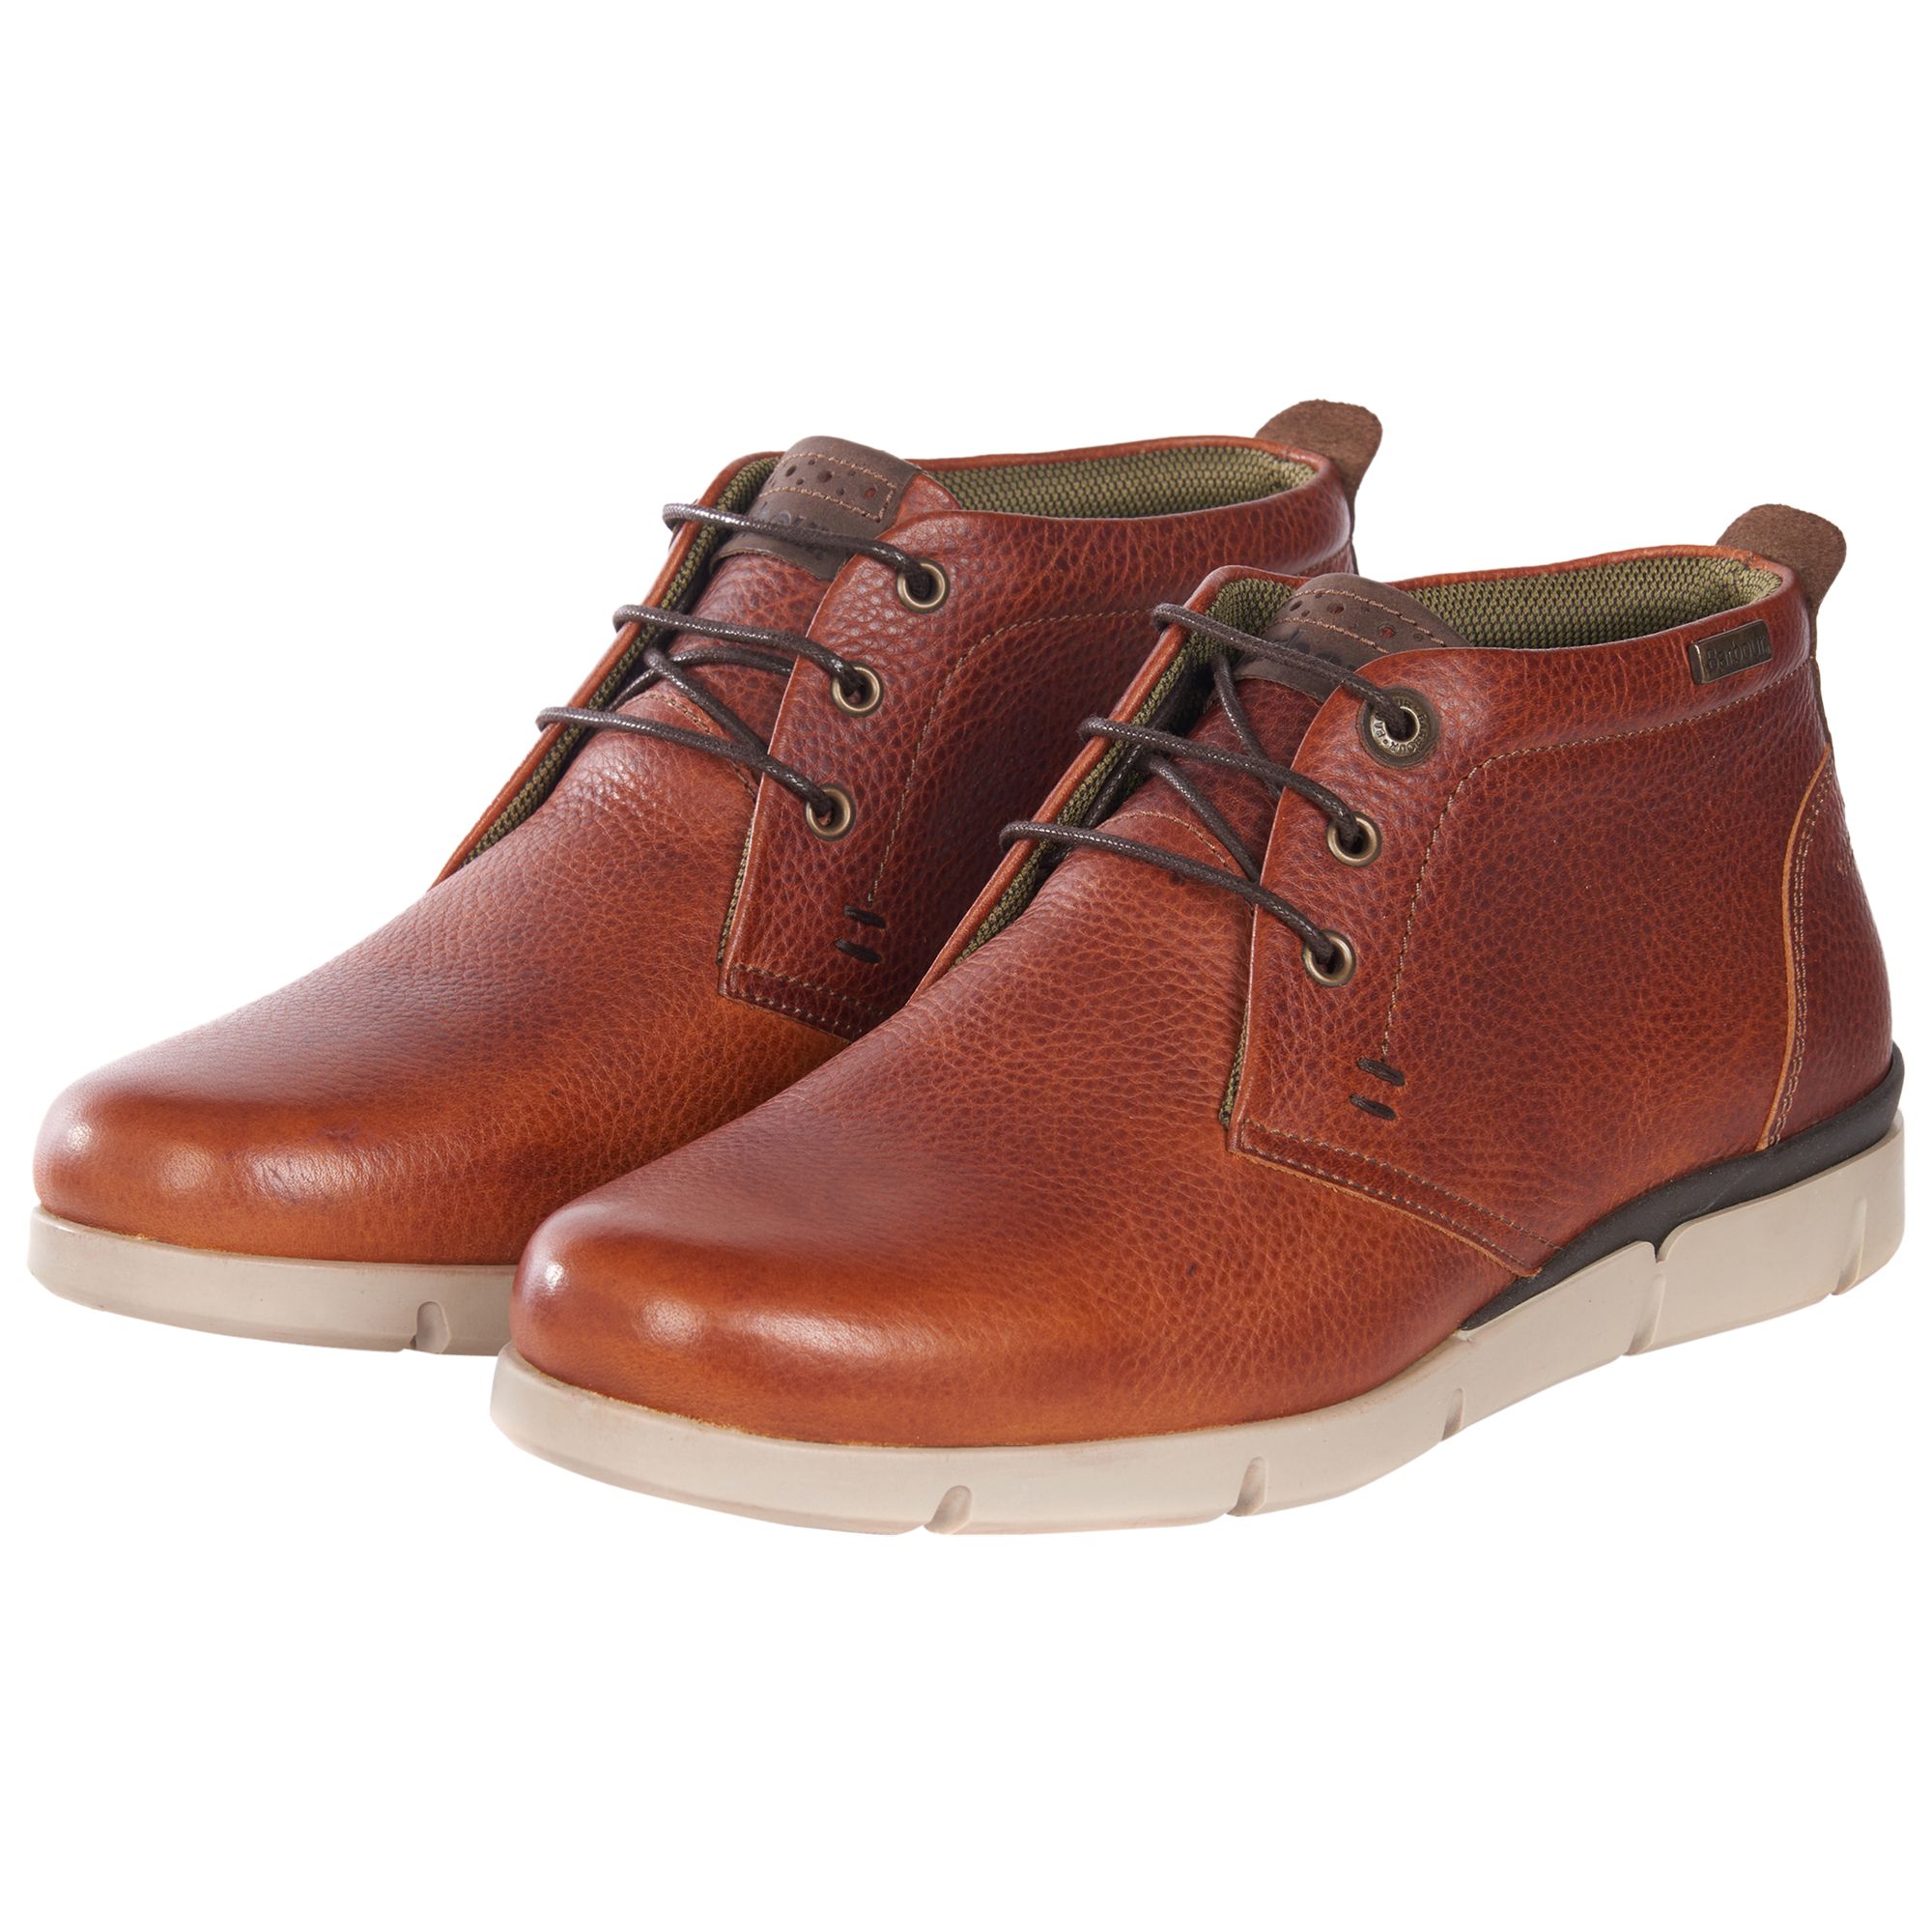 Barbour Collier Chukka Boots, Cognac at 